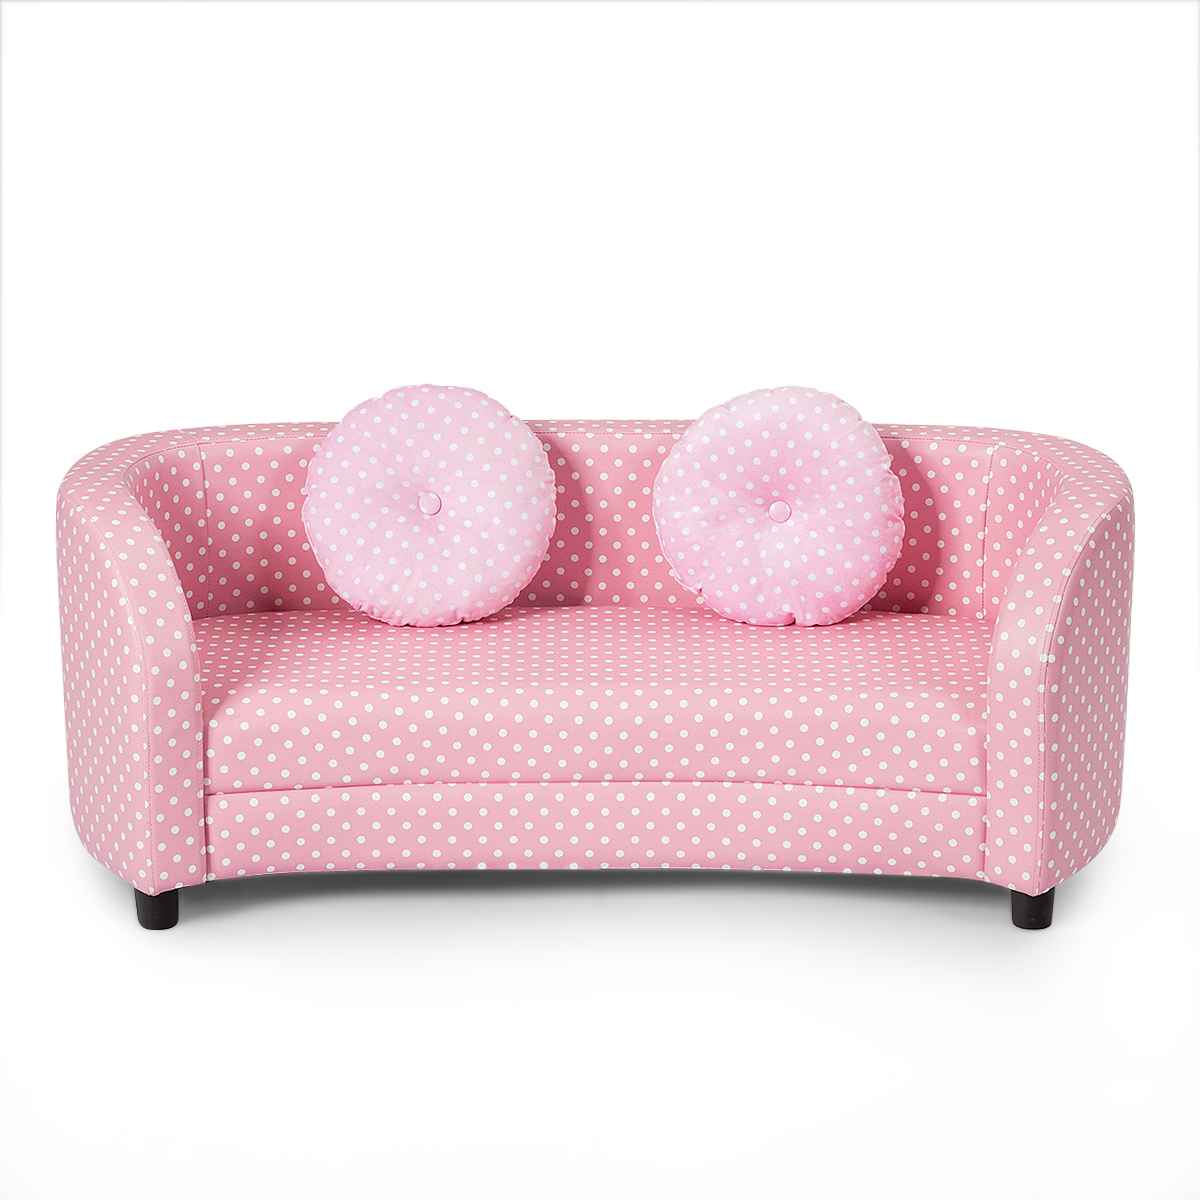 Topbuy 2 Seats Kids Couch Armrest Chair Playroom Furniture Two Cloth Pillows Pink